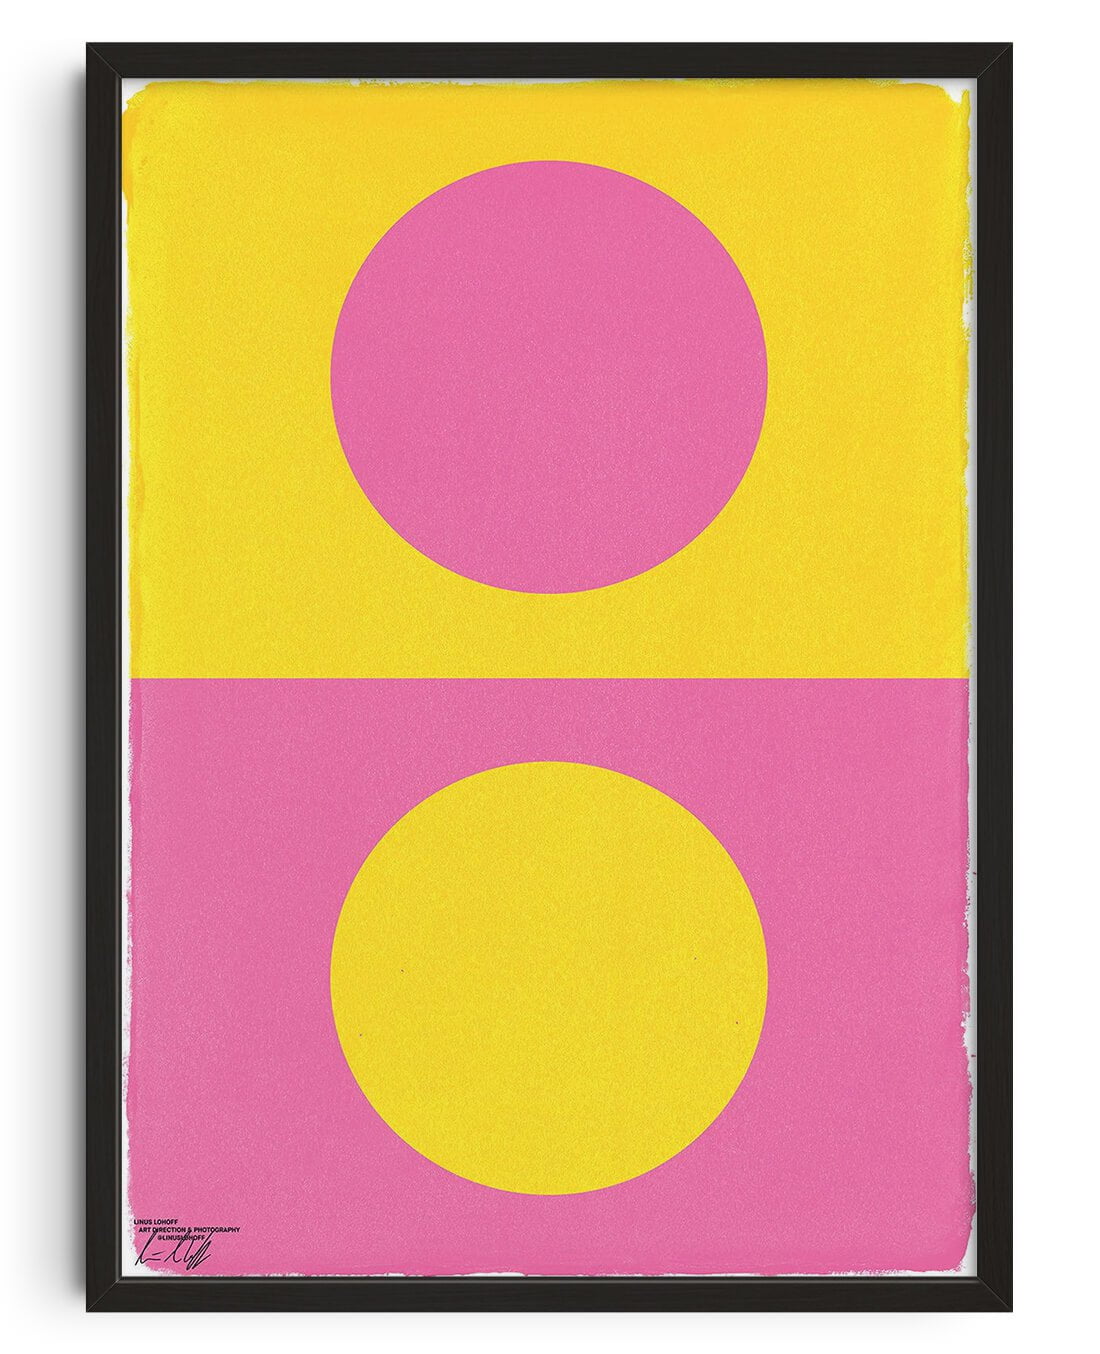 Balance by Linus Lohoff contemporary wall art print from DROOL